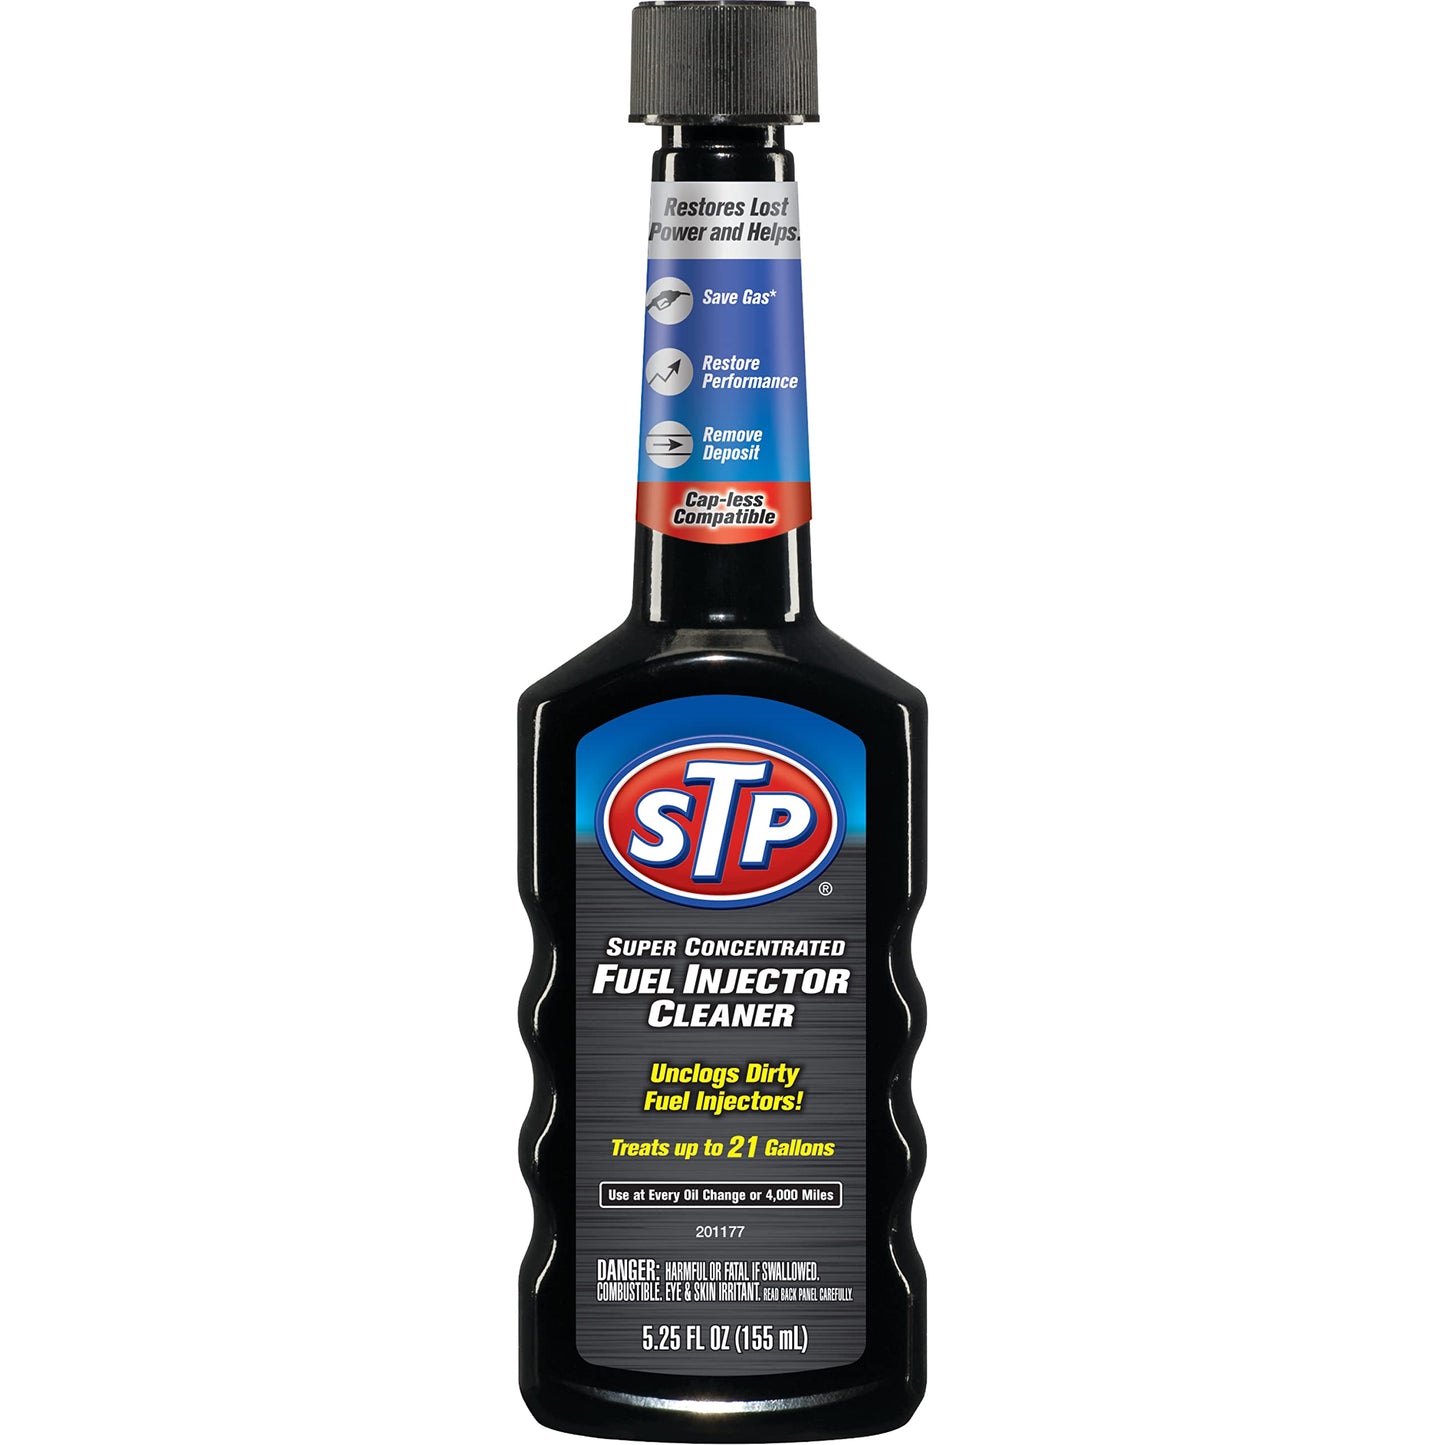 STP Super Concentrated Fuel Injector Cleaner 5.25oz